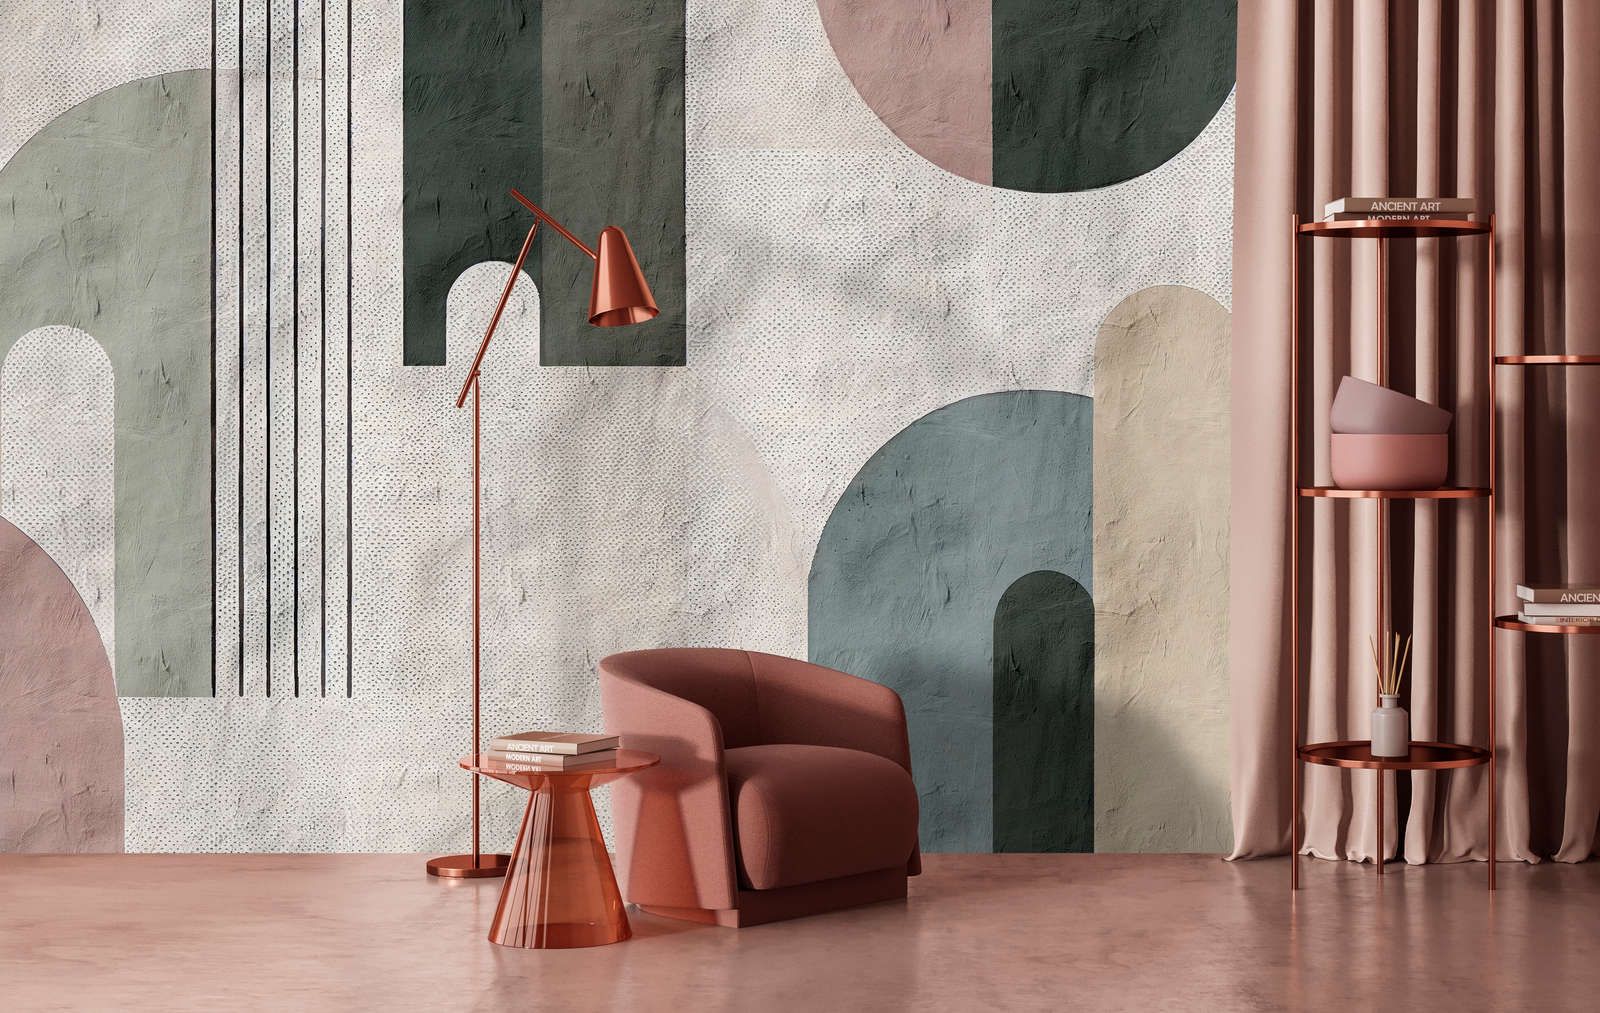             Photo wallpaper »torenta« - Graphic pattern with round arch, clay plaster texture - Smooth, slightly shiny premium non-woven fabric
        